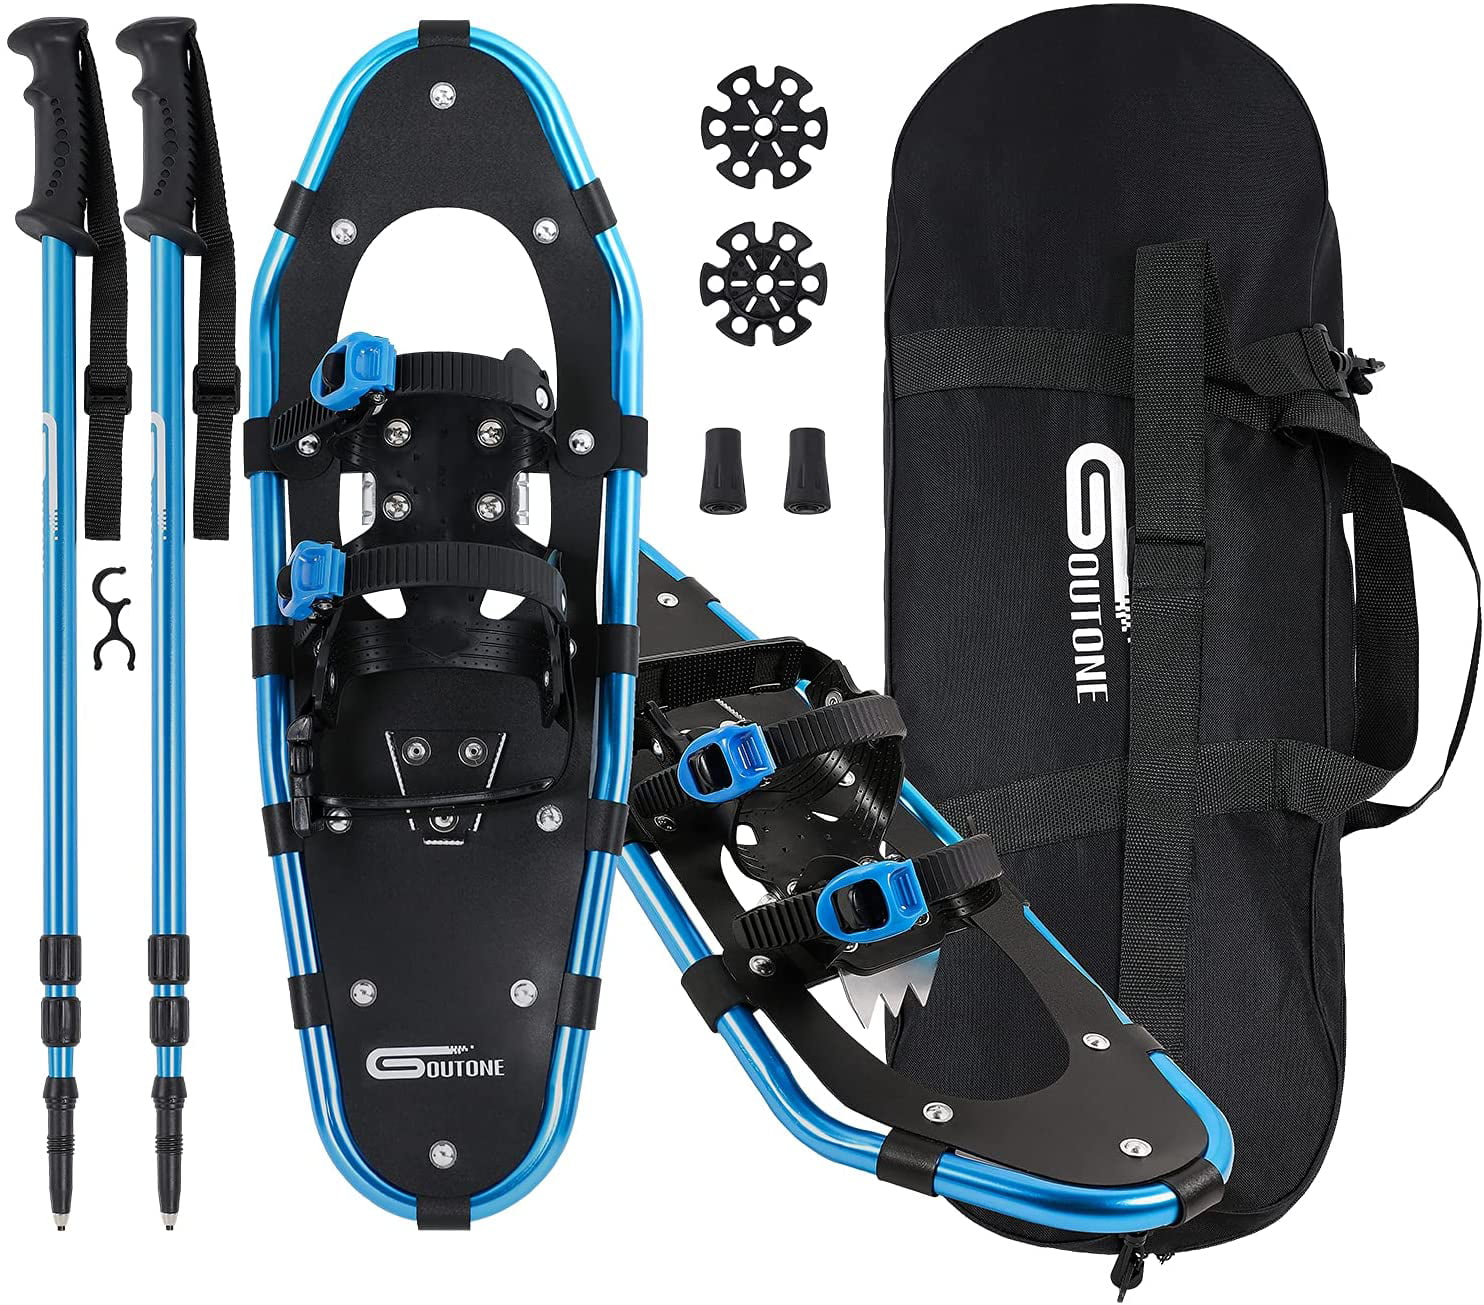 Aluminum Terrain Lightweight Snowshoes with Trekking Poles and Carrying Tote Bag INHE 21/25/27/30 Inches Snow Shoes for Women Men Girls Boys Kids 